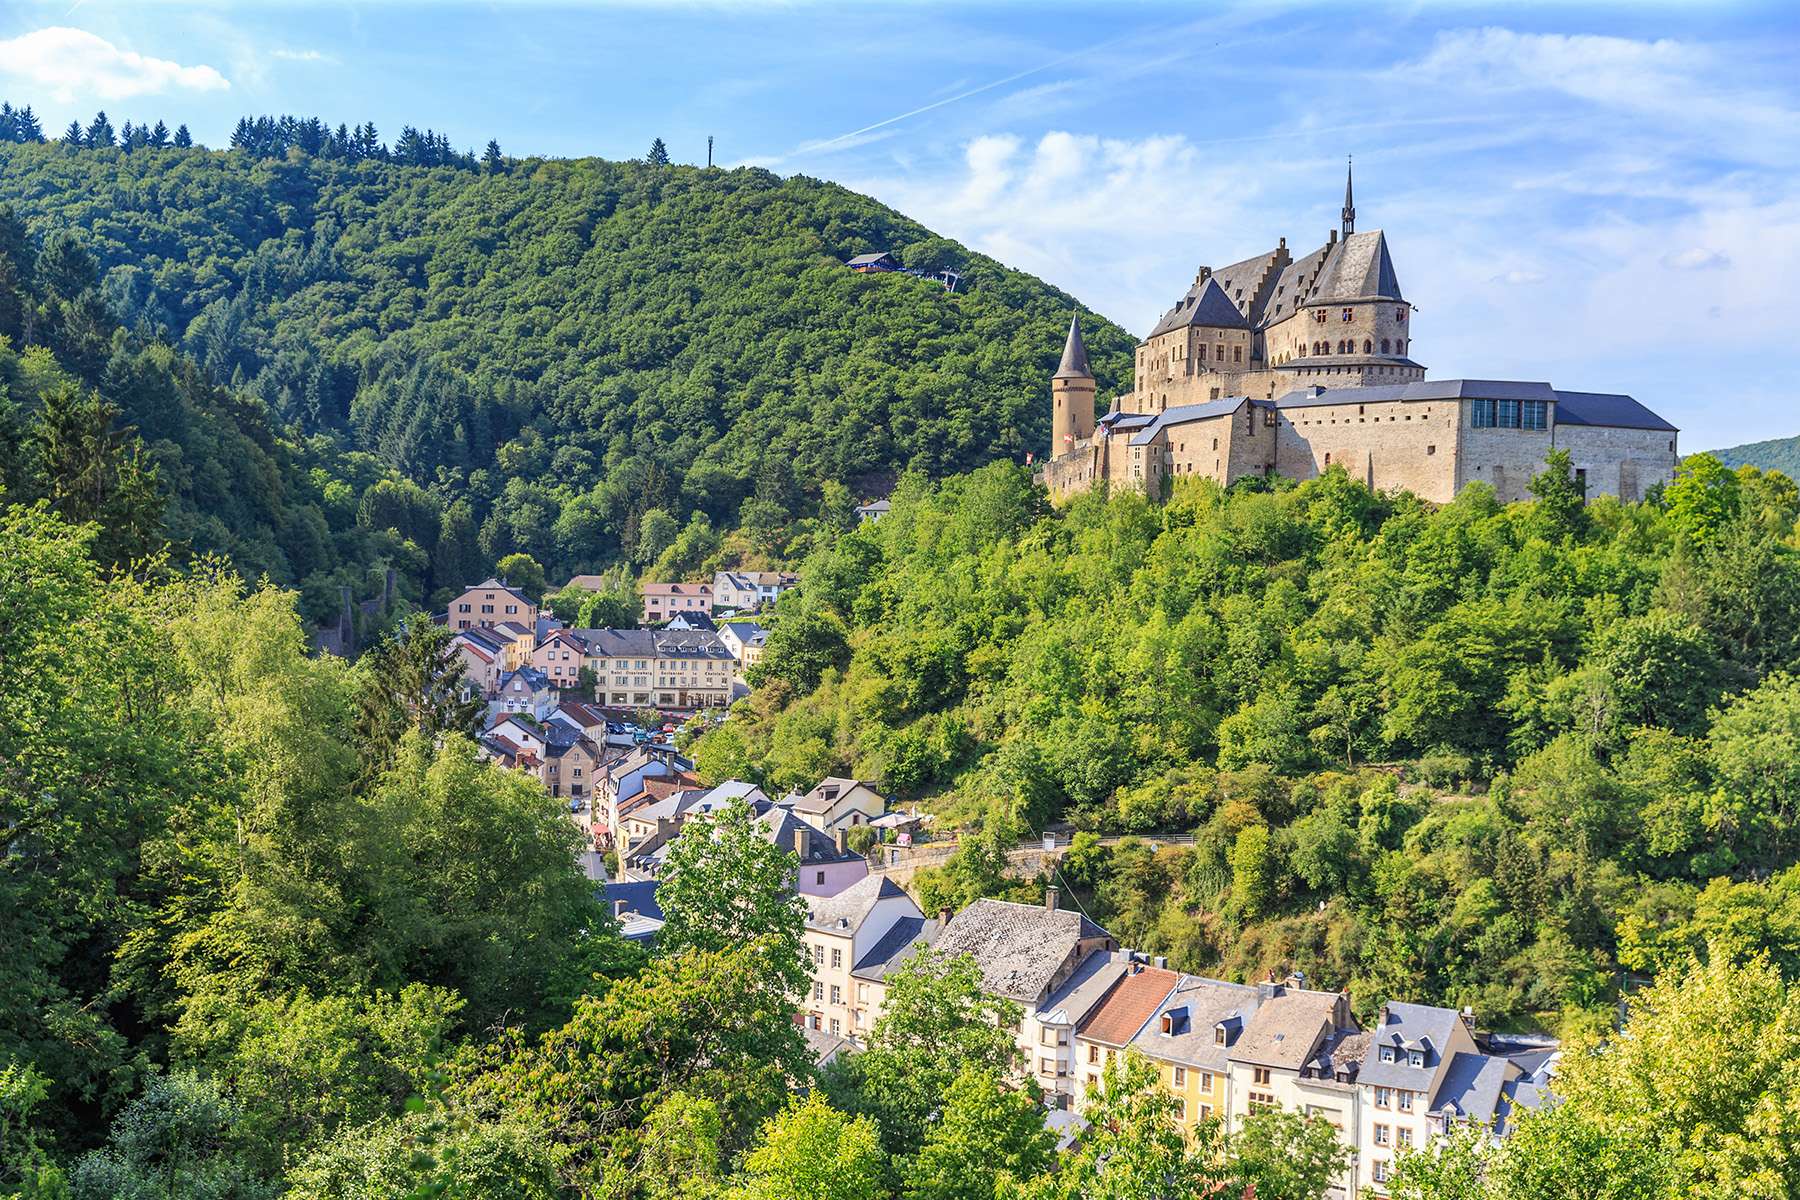 8. <strong>Luxembourg</strong><br><strong>The skinny:</strong> 167% increase; the entire City of Luxembourg is a UNESCO World Heritage Site, has a ton of underrated wineries<br><strong>Choicest digs:</strong> <a href="https://www.airbnb.com/rooms/27420422?location=Luxembourg%20City%2C%20Luxembourg&source_impression_id=p3_1572463526_aXfloB1qLPMGaGXq">Luxembourg City Studio</a>